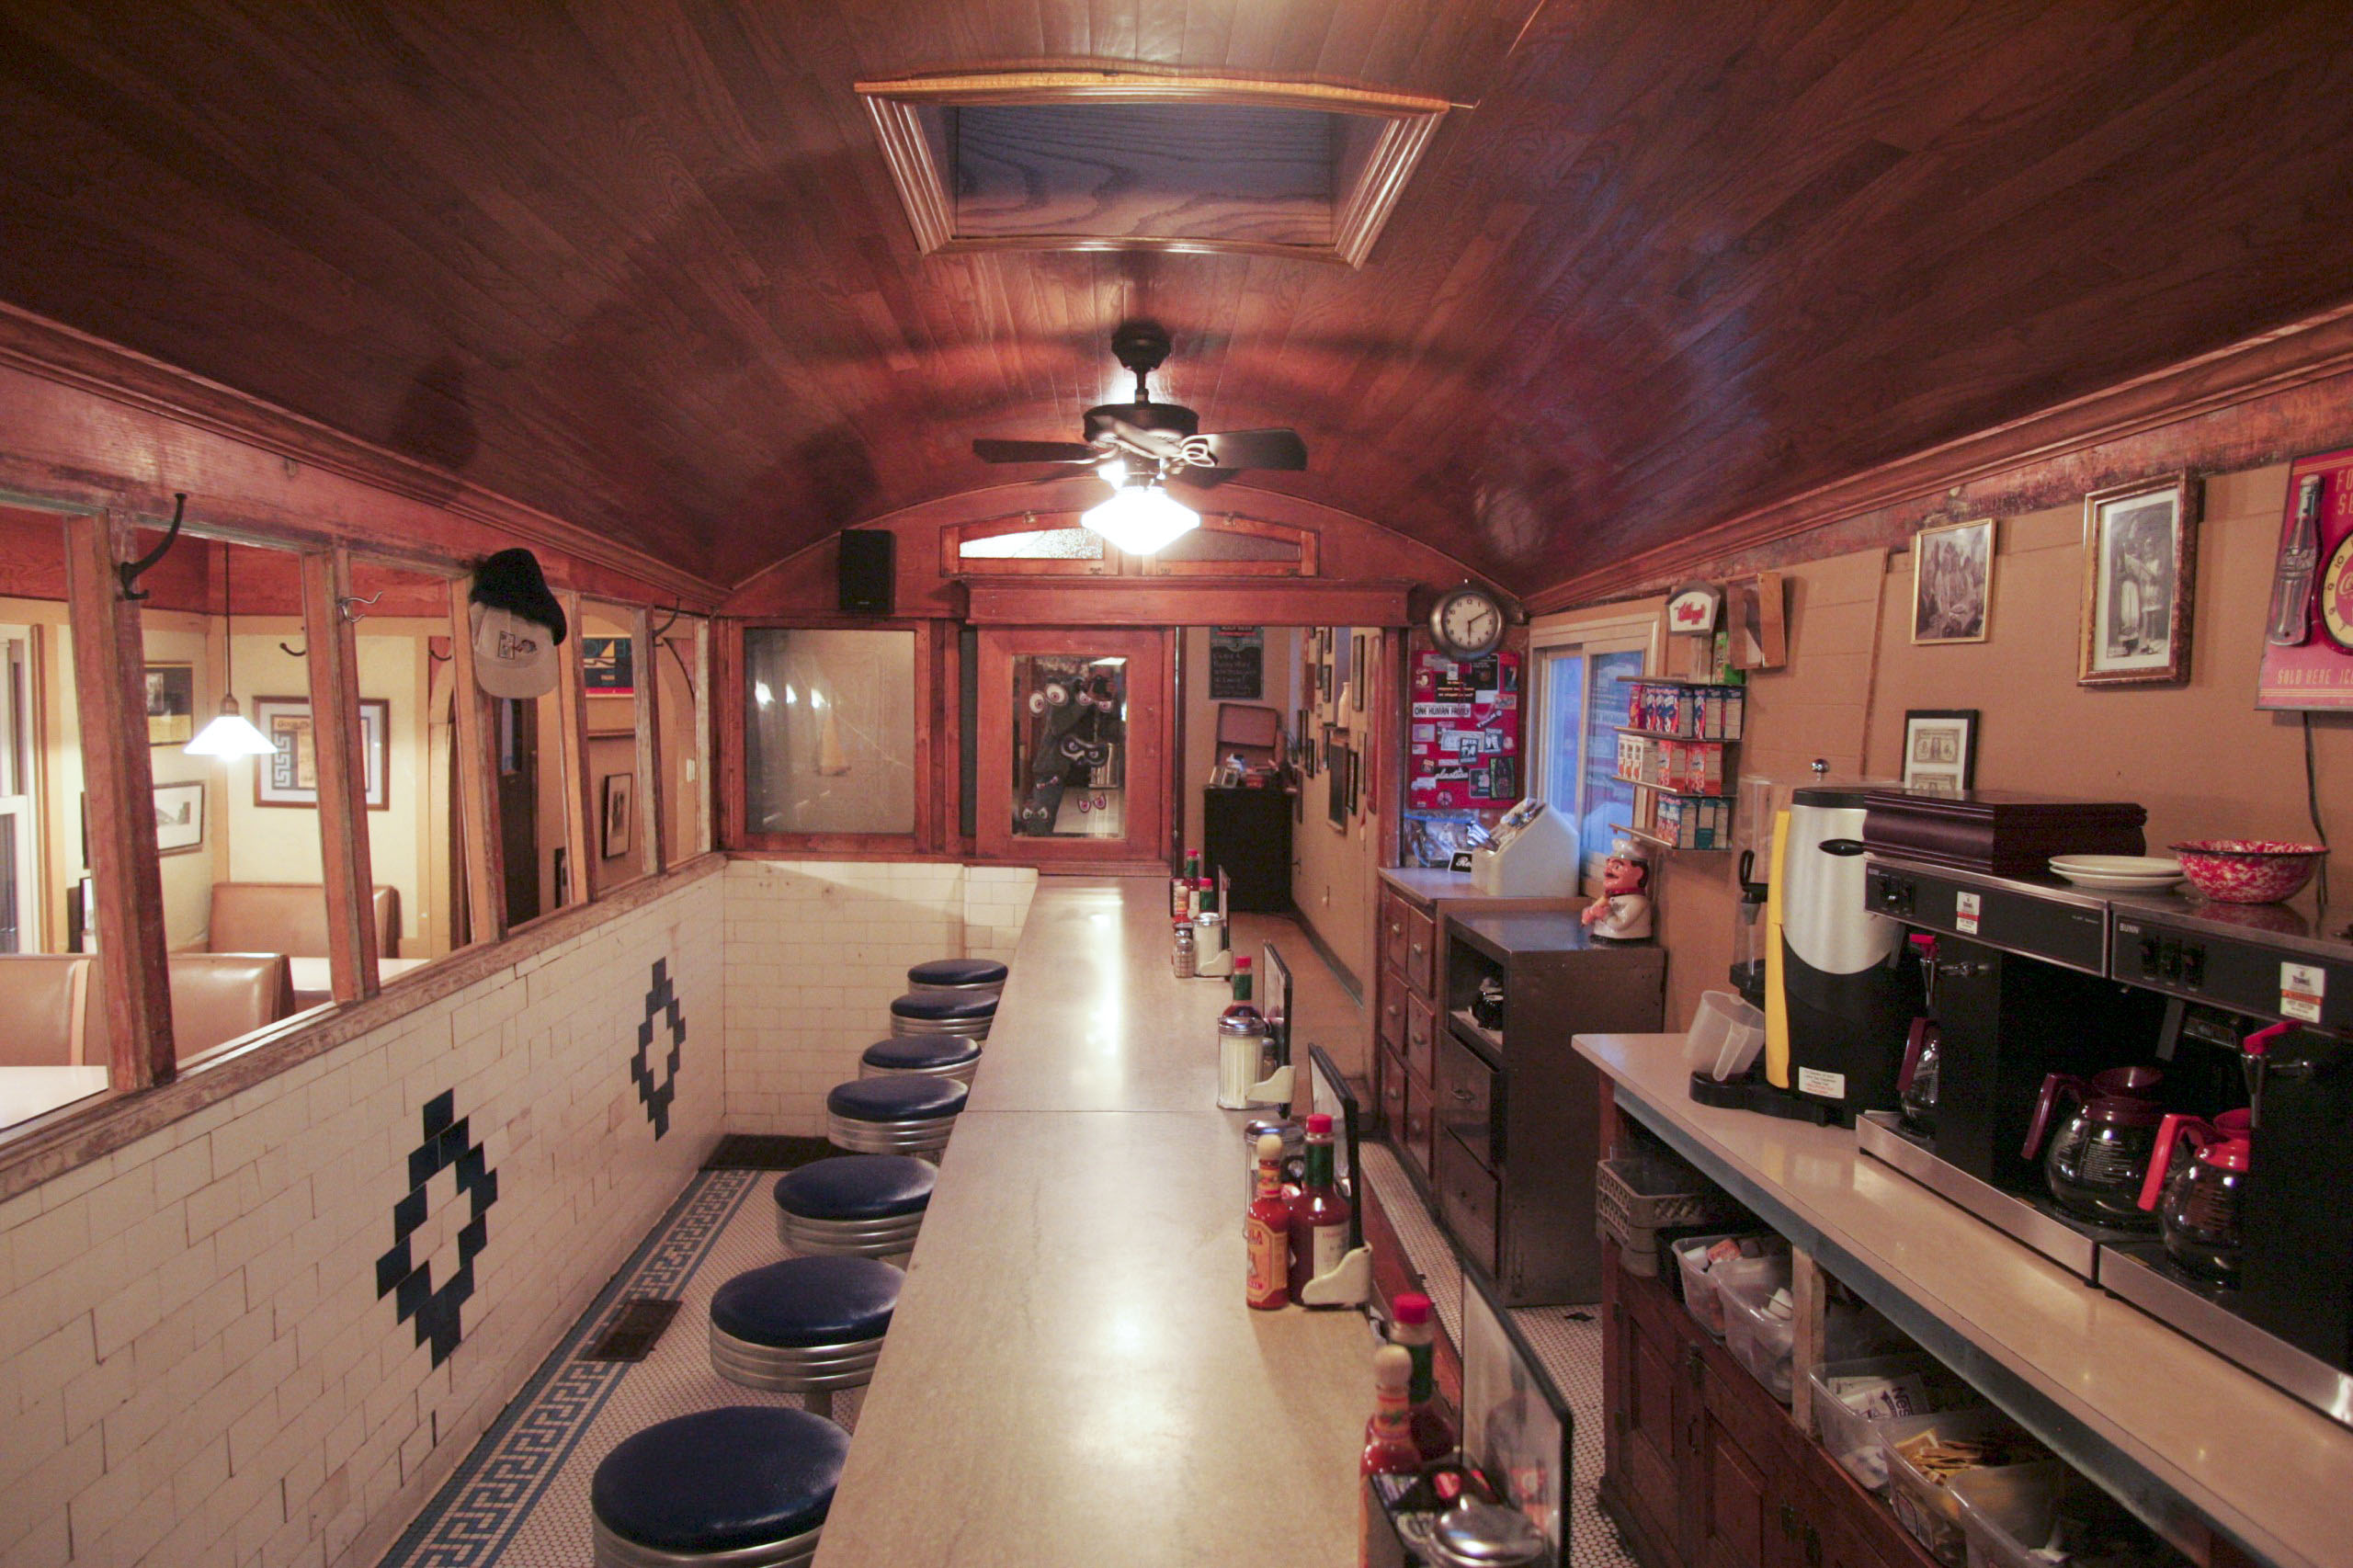 The 21 Best Diners in America | HuffPost